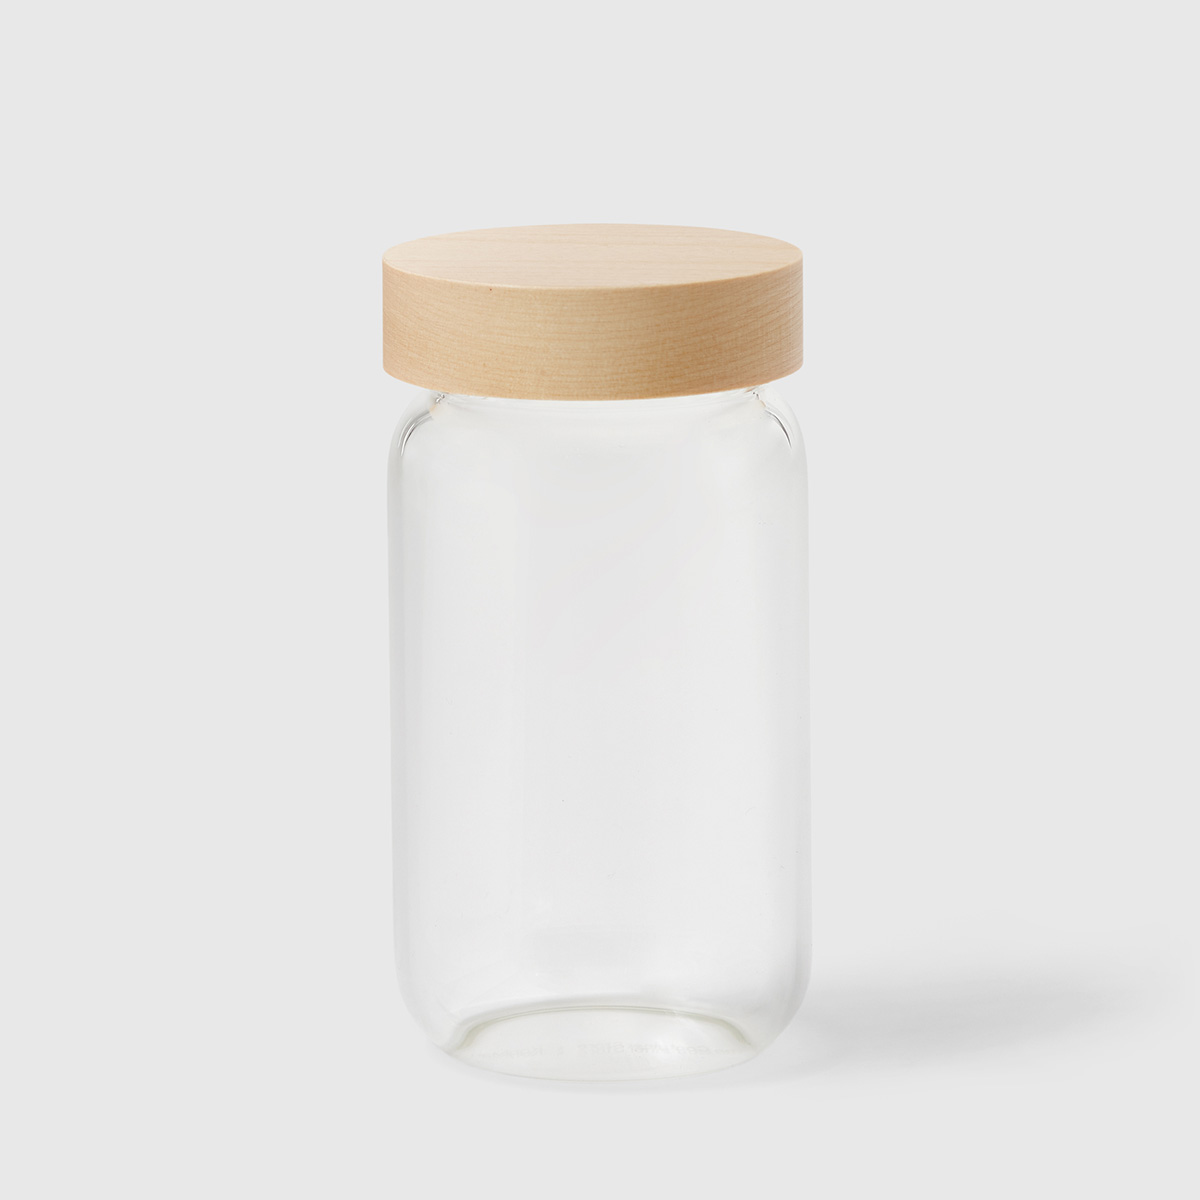 https://www.containerstore.com/catalogimages/441403/10086602_Kon_Mari_large_glass_spice_.jpg